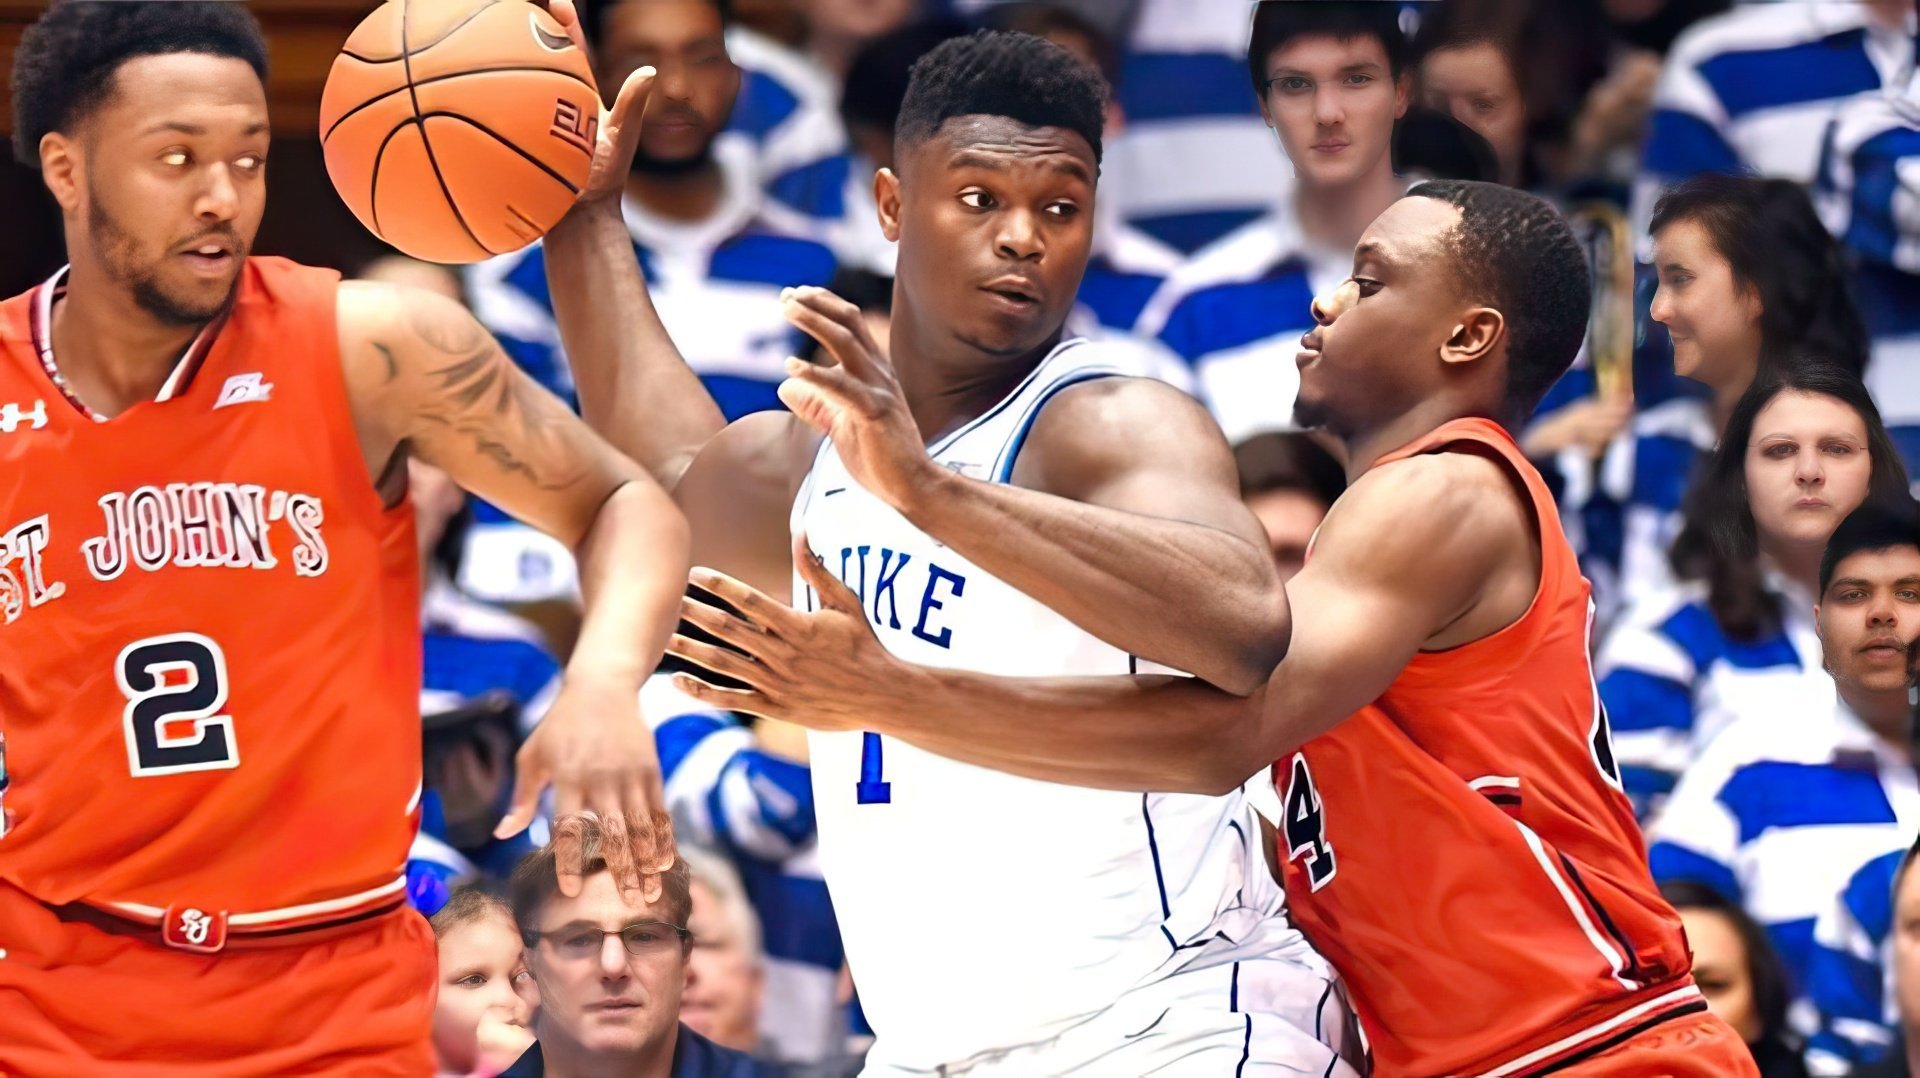 Zion Williamson took part in the World Basketball Championship in 2019 in China